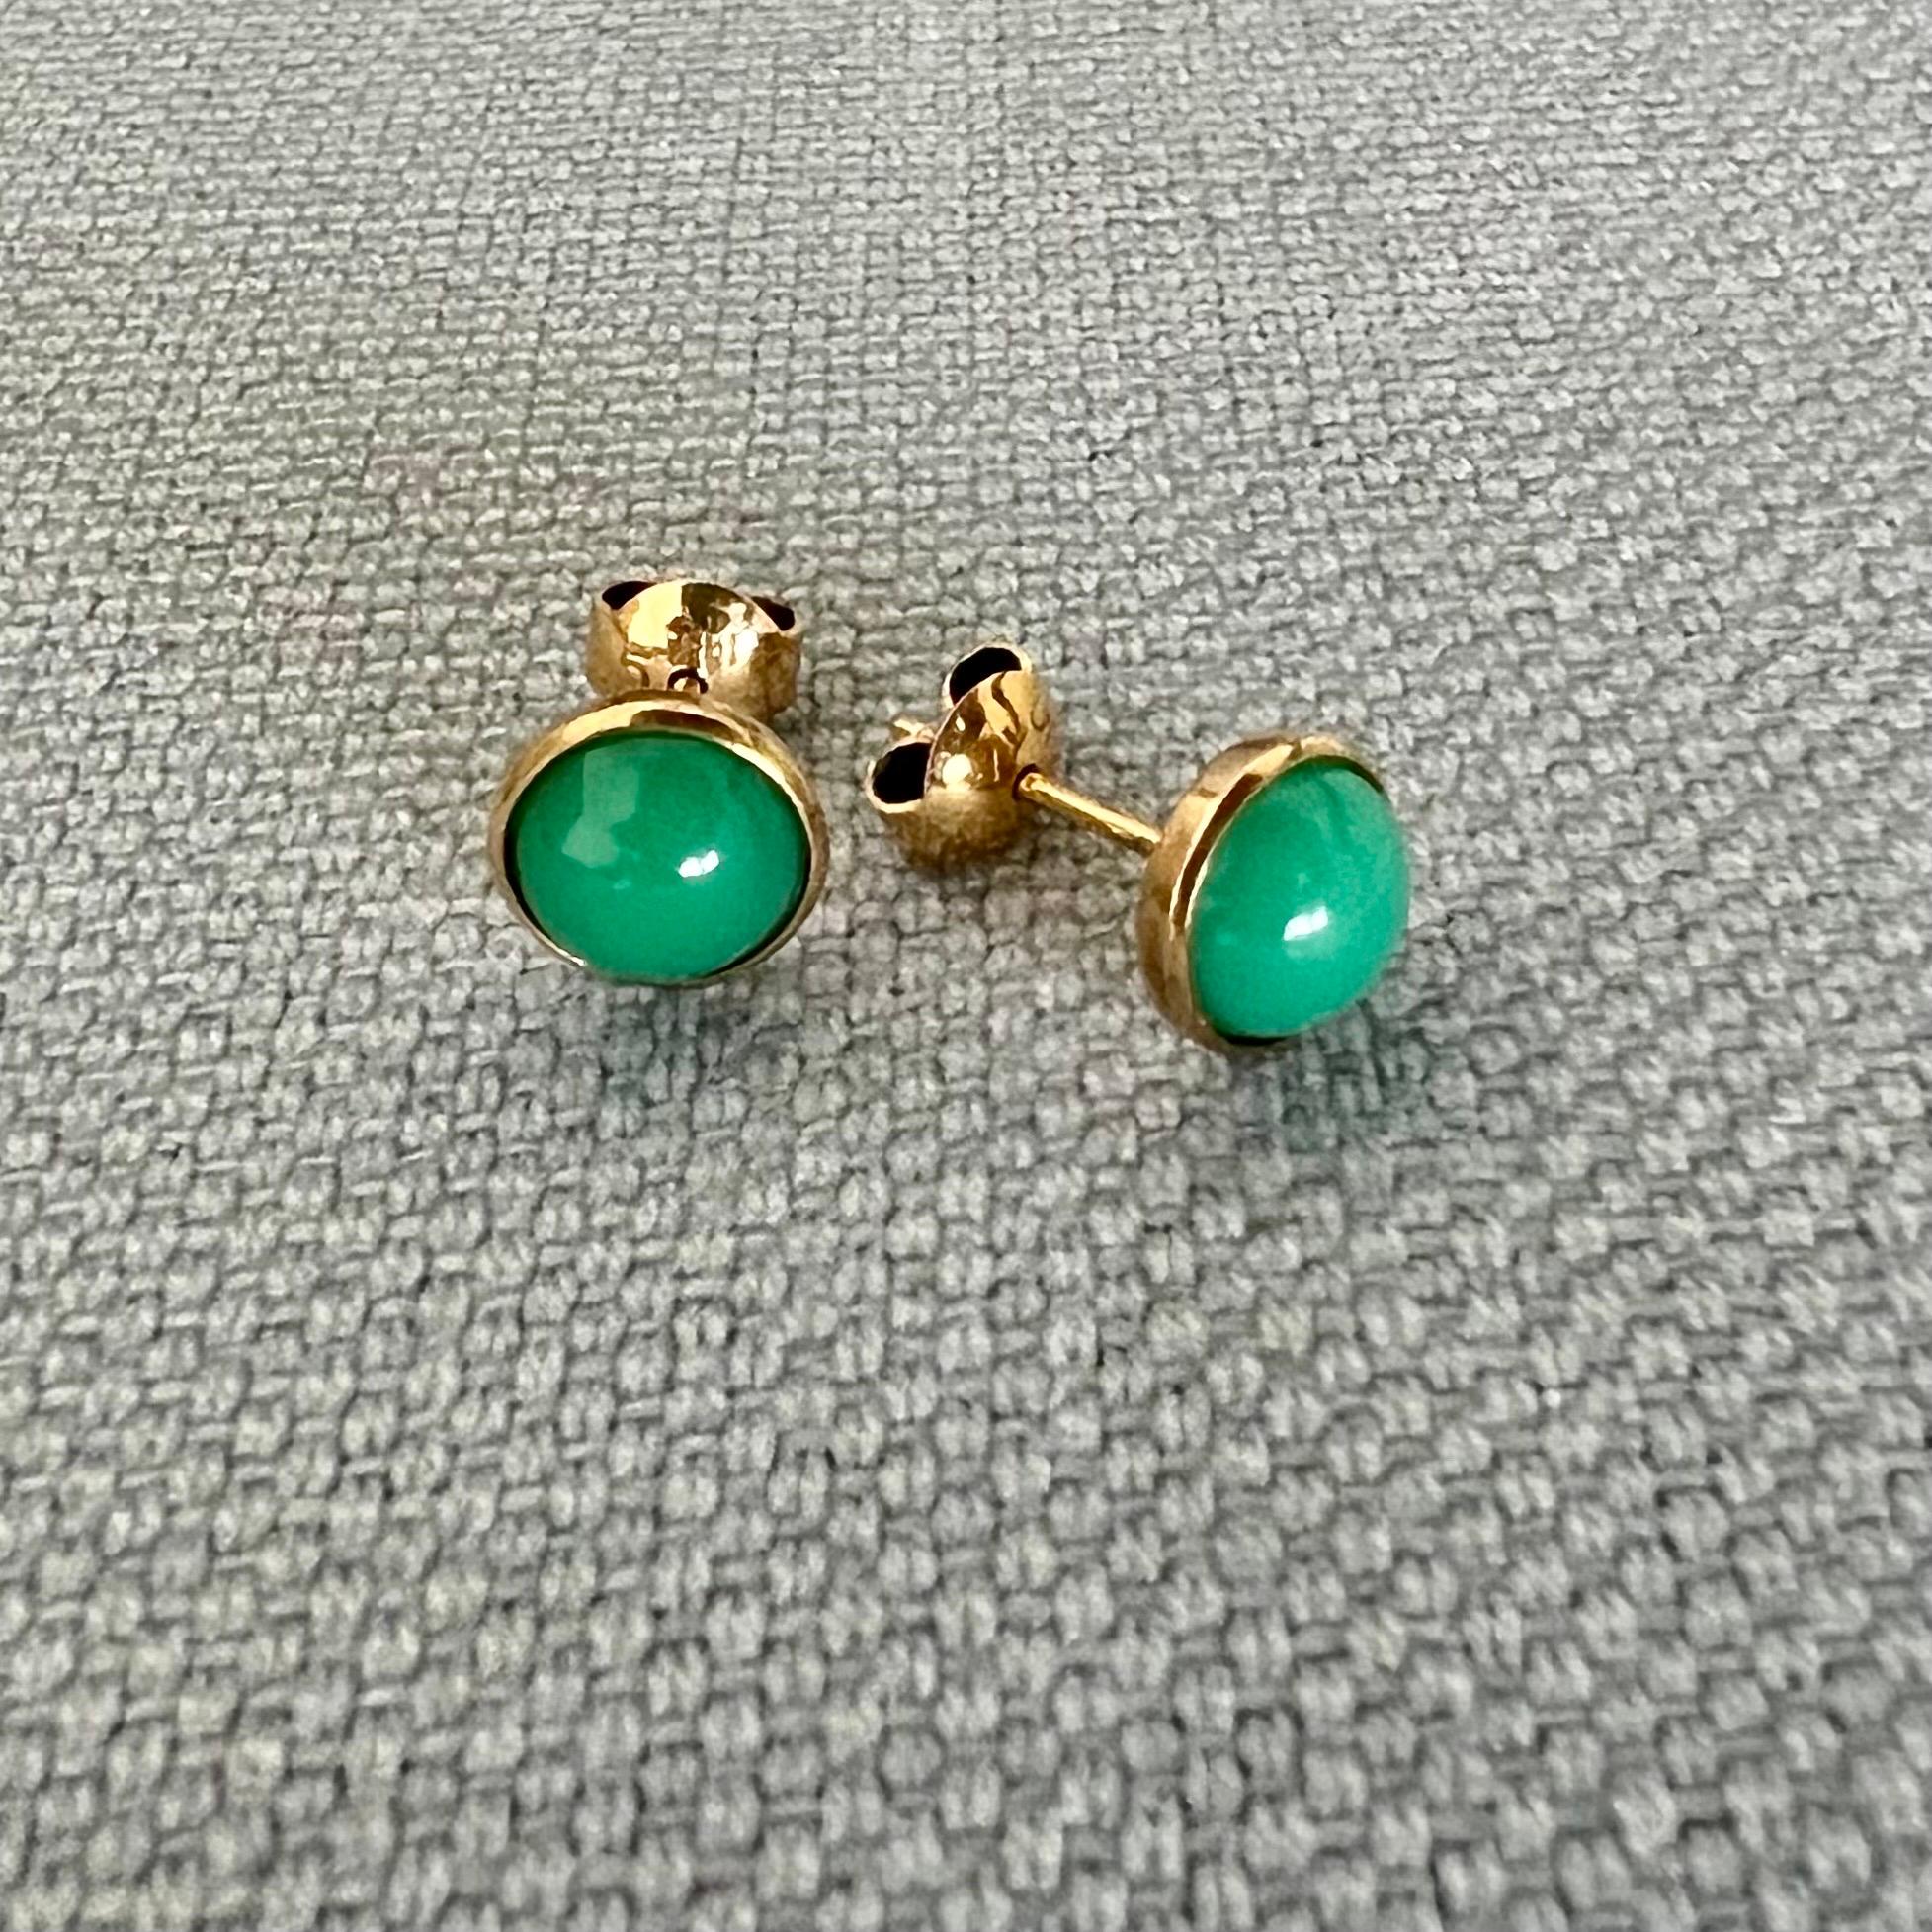 A gorgeous pair of green delight -  these vintage jade and gold stud earrings. The natural jade studs are bezel set in a 14 karat gold mounting. The studs are crafted with a round cabochon green jade stone. The jade stones have a nice deep green